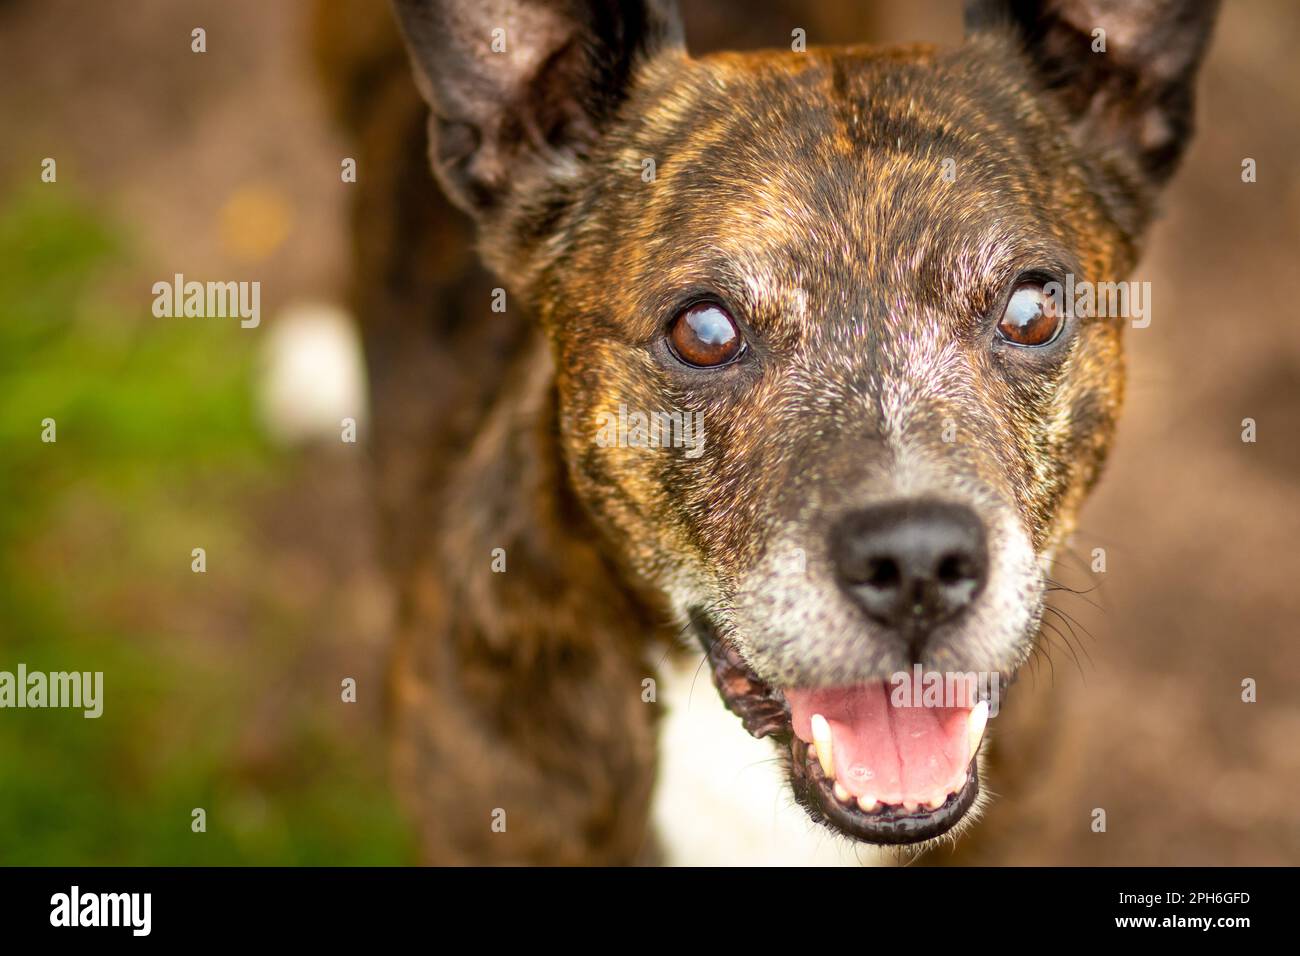 Loyal and trusting - a dog looks at its owner with open mouth Stock Photo